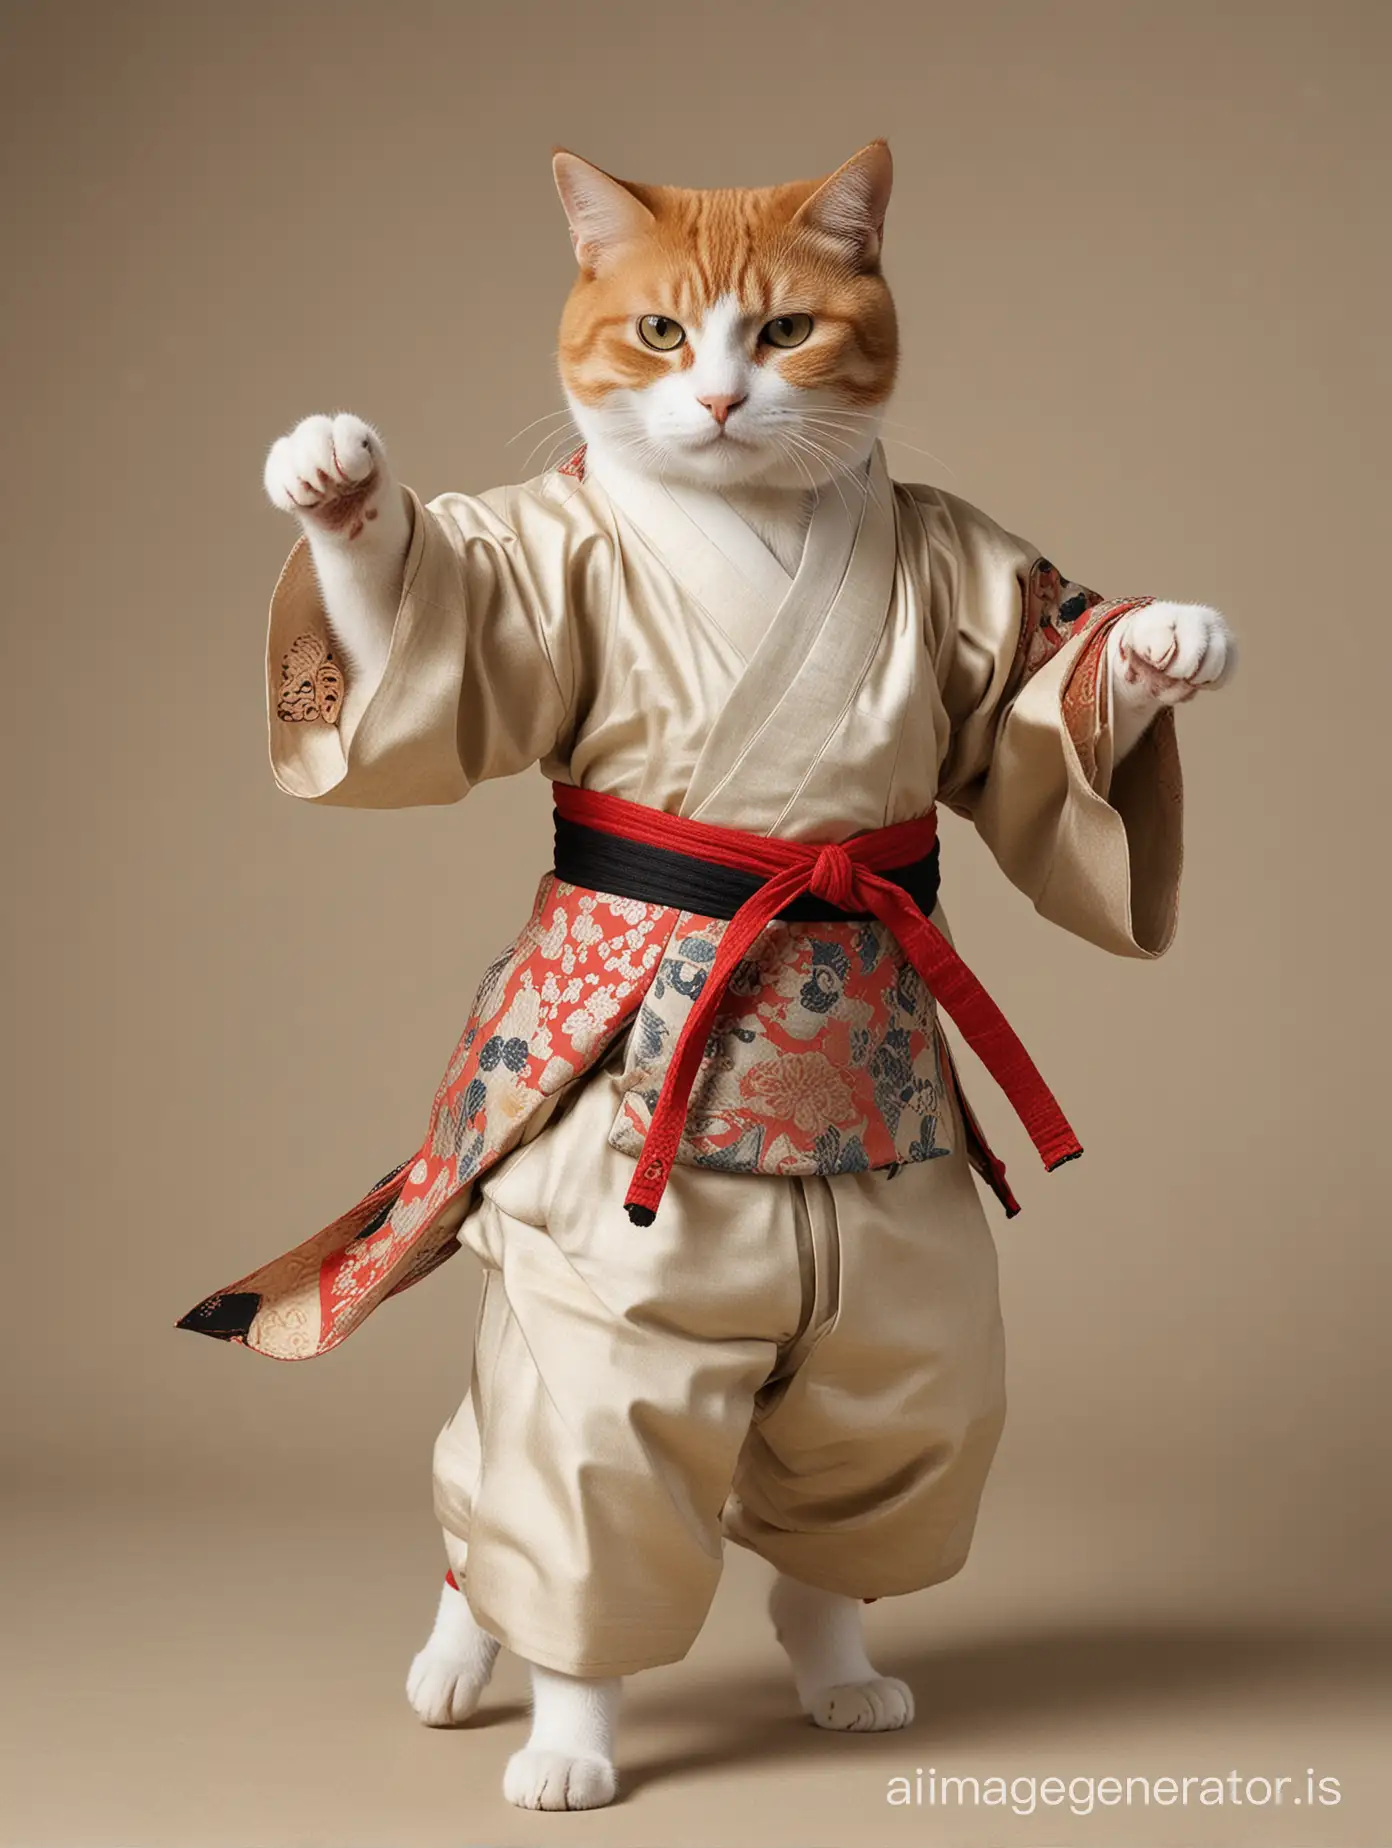 The cat in motion depicts martial arts of the East, with the cat wearing clothing from the 16th century in Japan